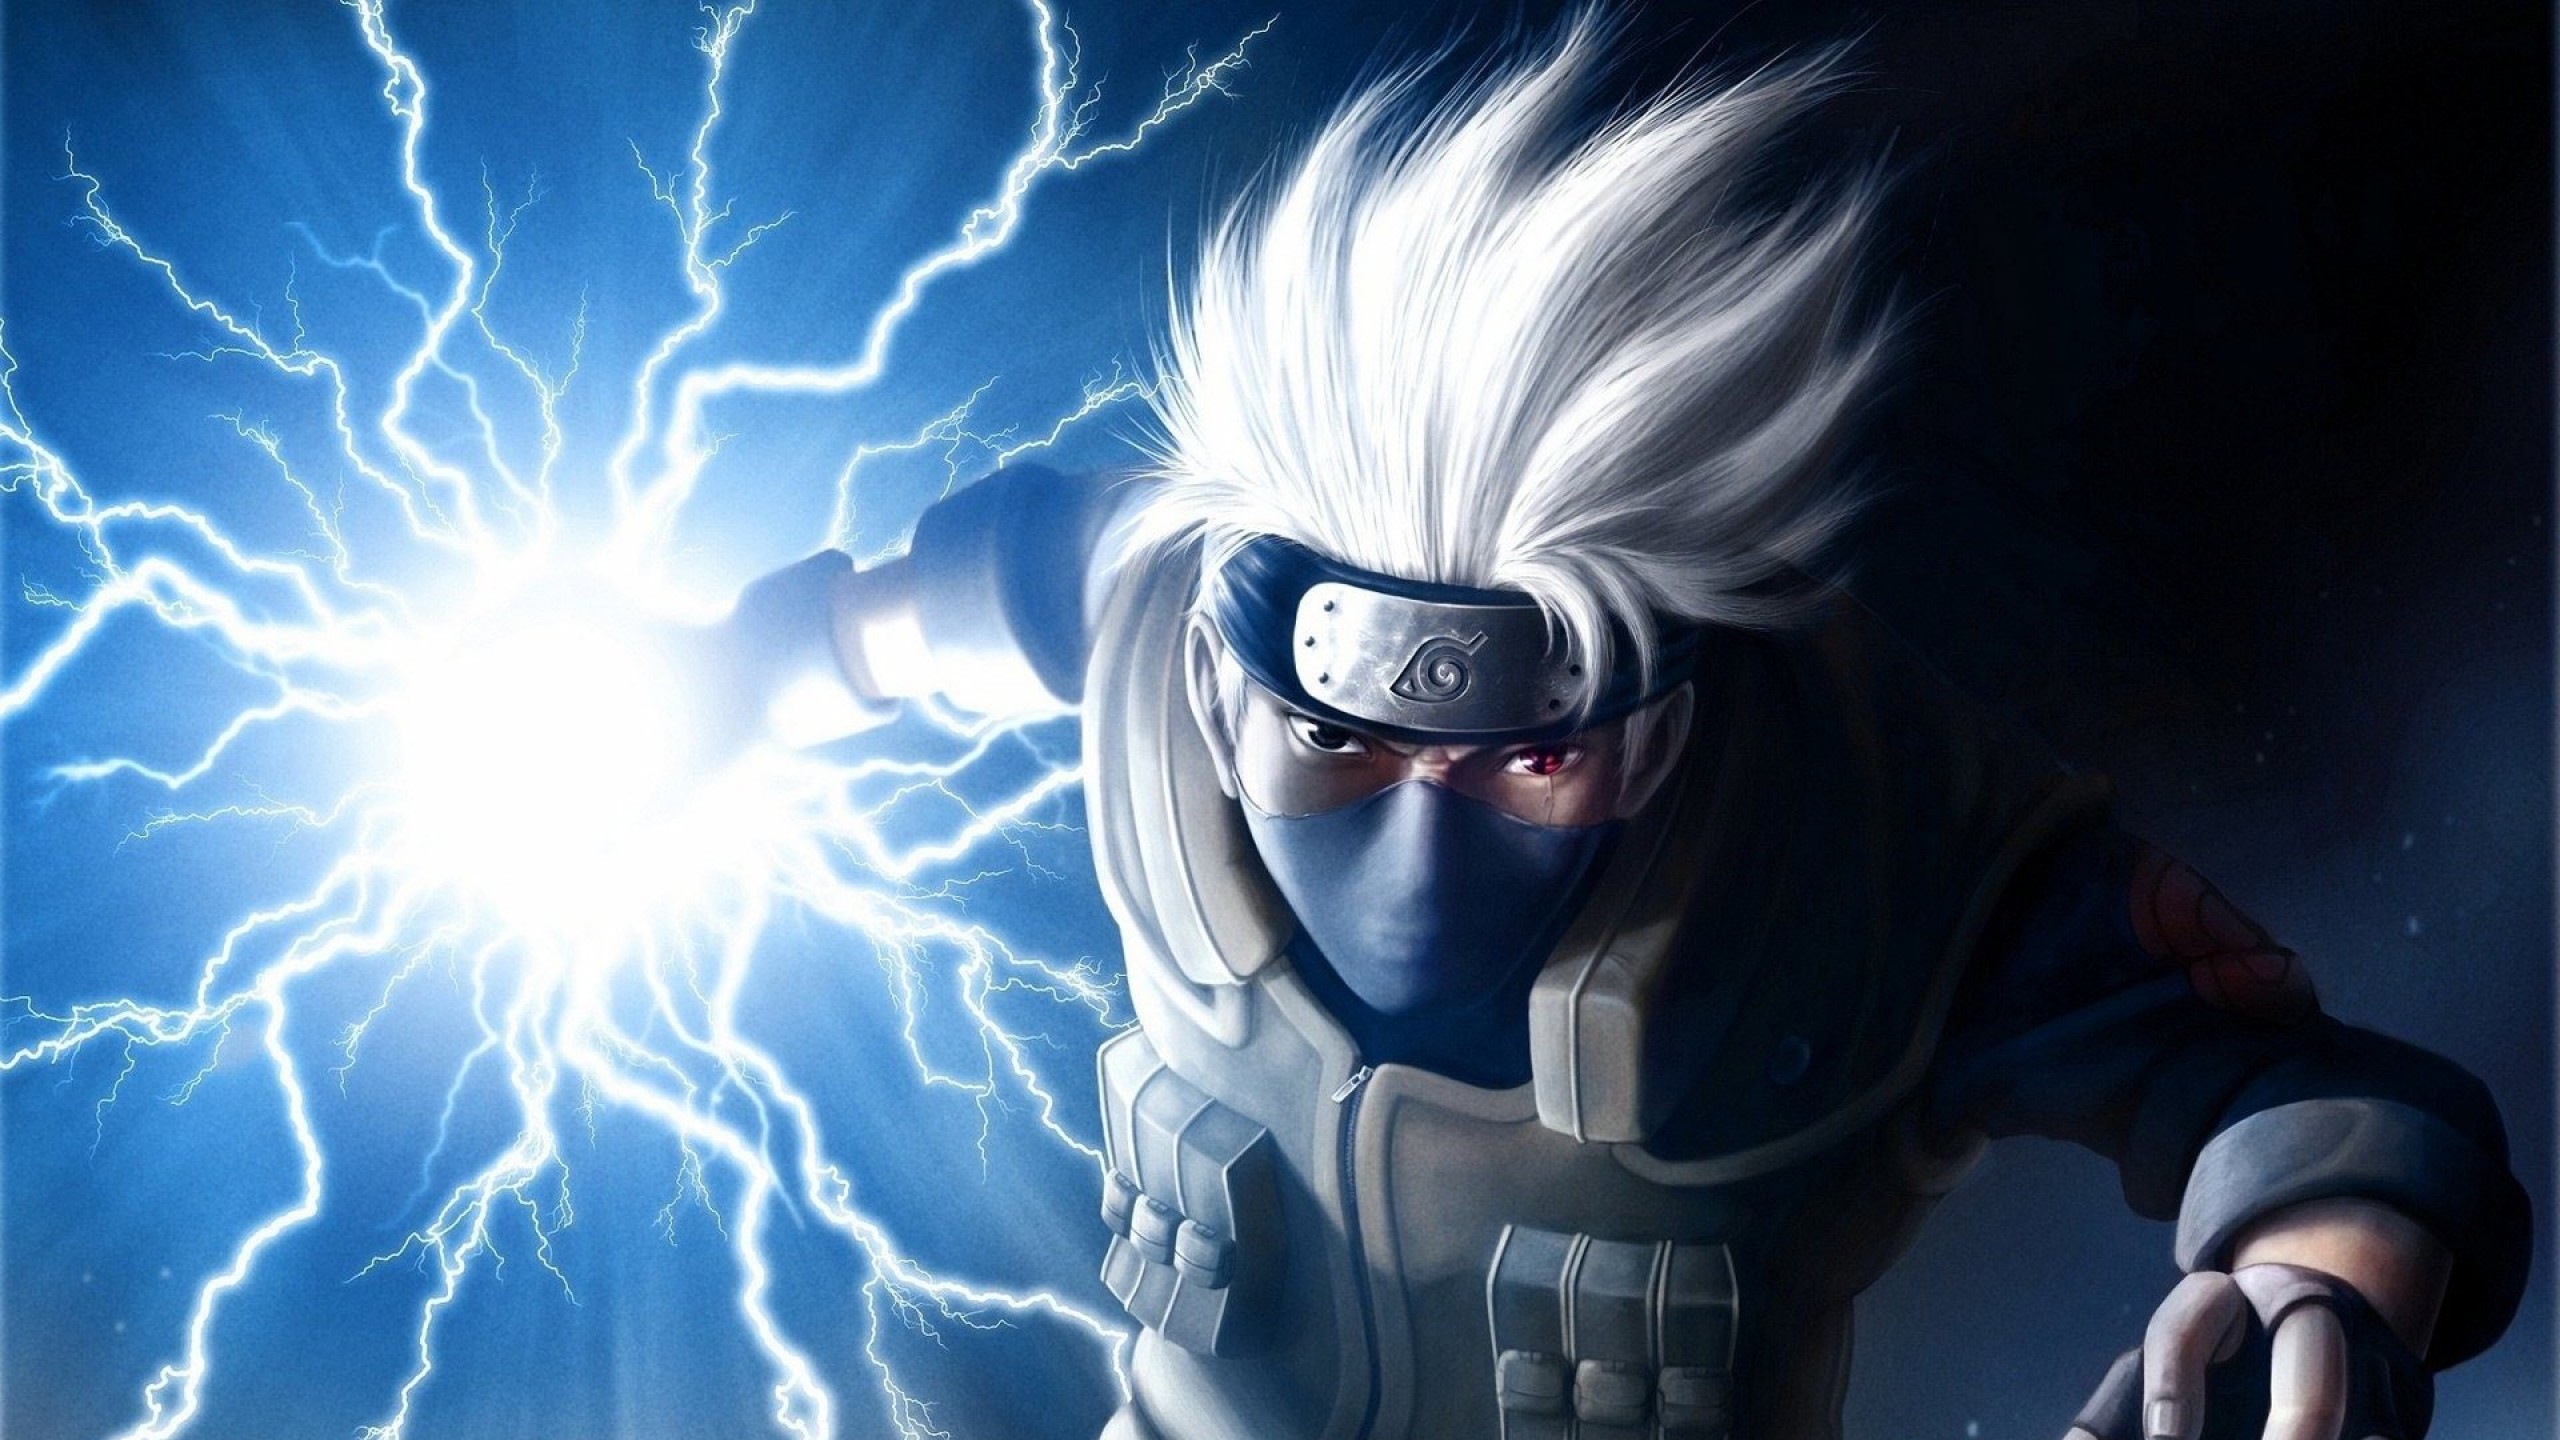 2560x1440 naruto hatake kakashi art images wallpapers hd desktop wallpapers hd high  definition windows 10 colourful images backgrounds download wallpaper free  ...